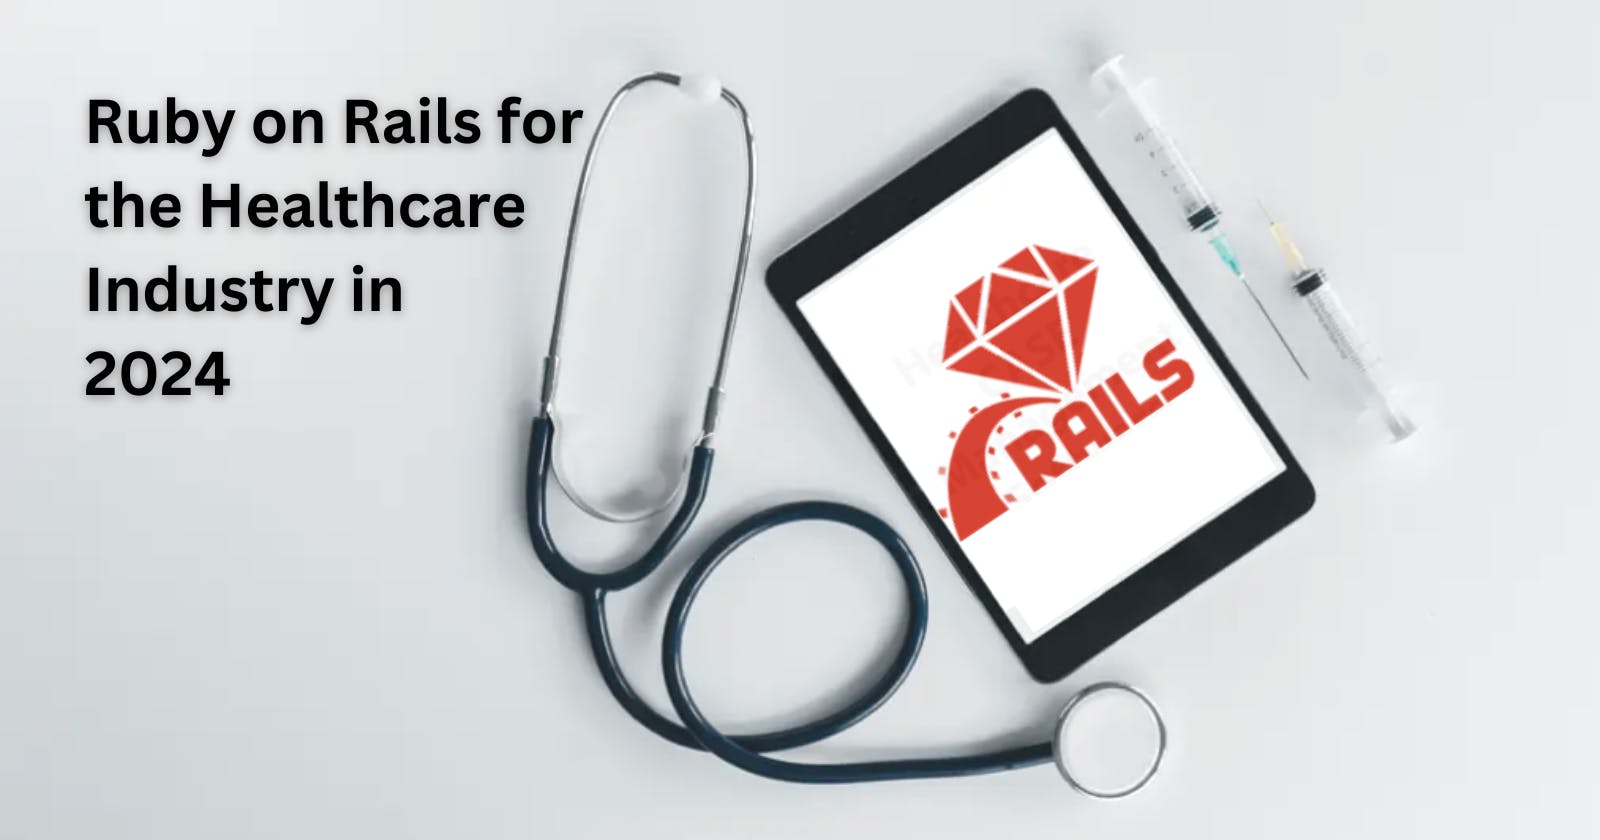 Ruby on Rails for the Healthcare Industry in 2024